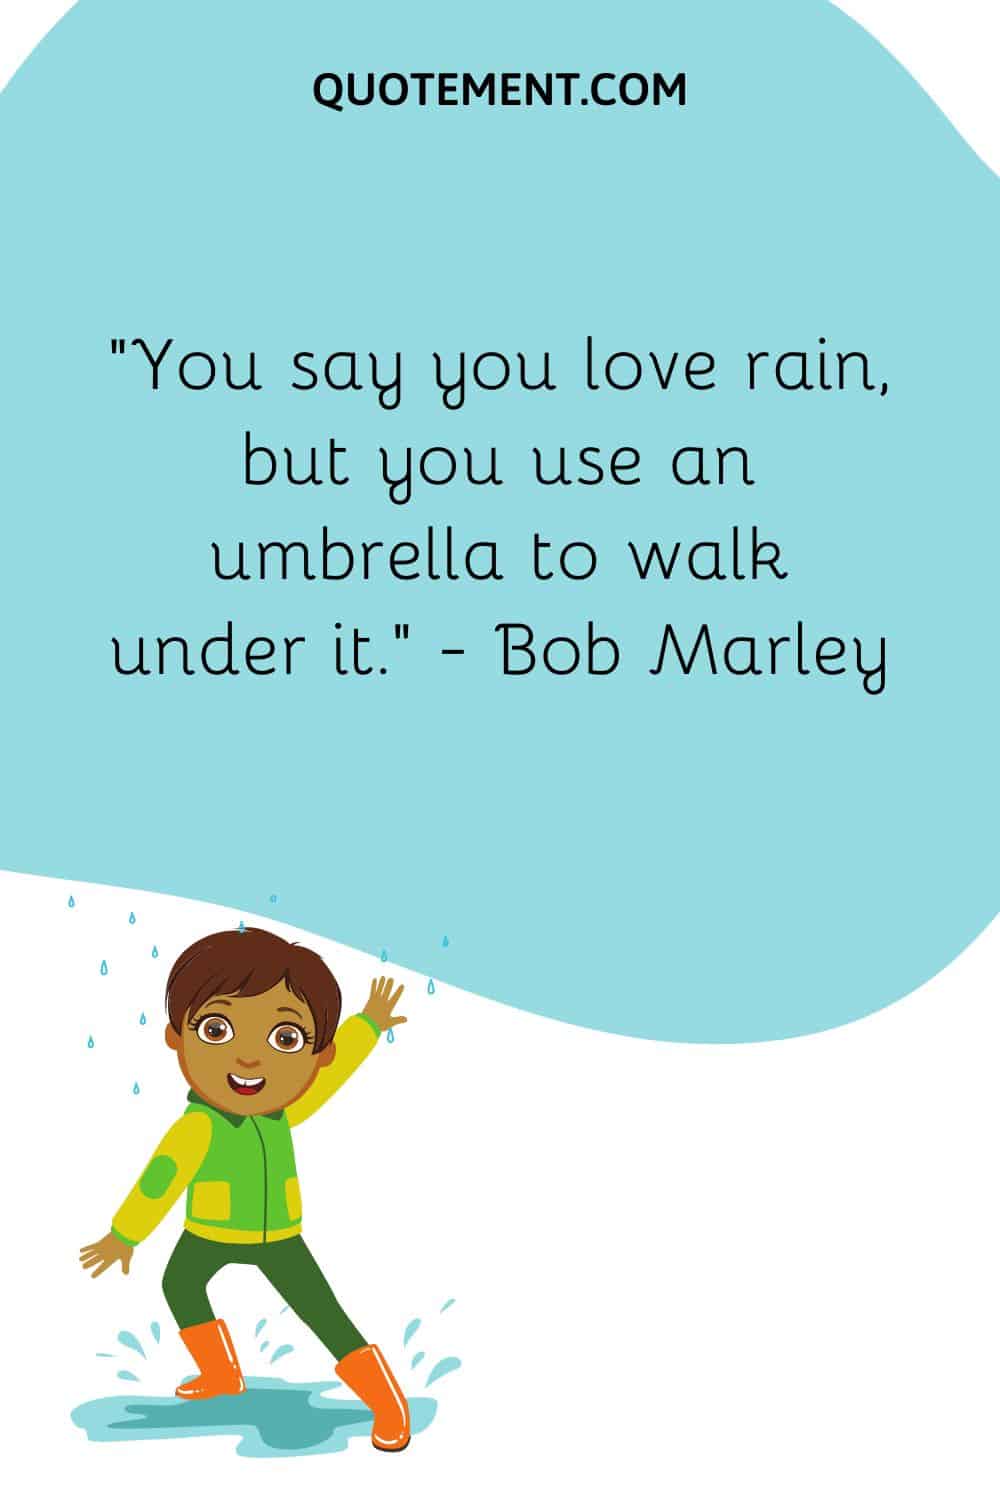 You say you love rain, but you use an umbrella to walk under it